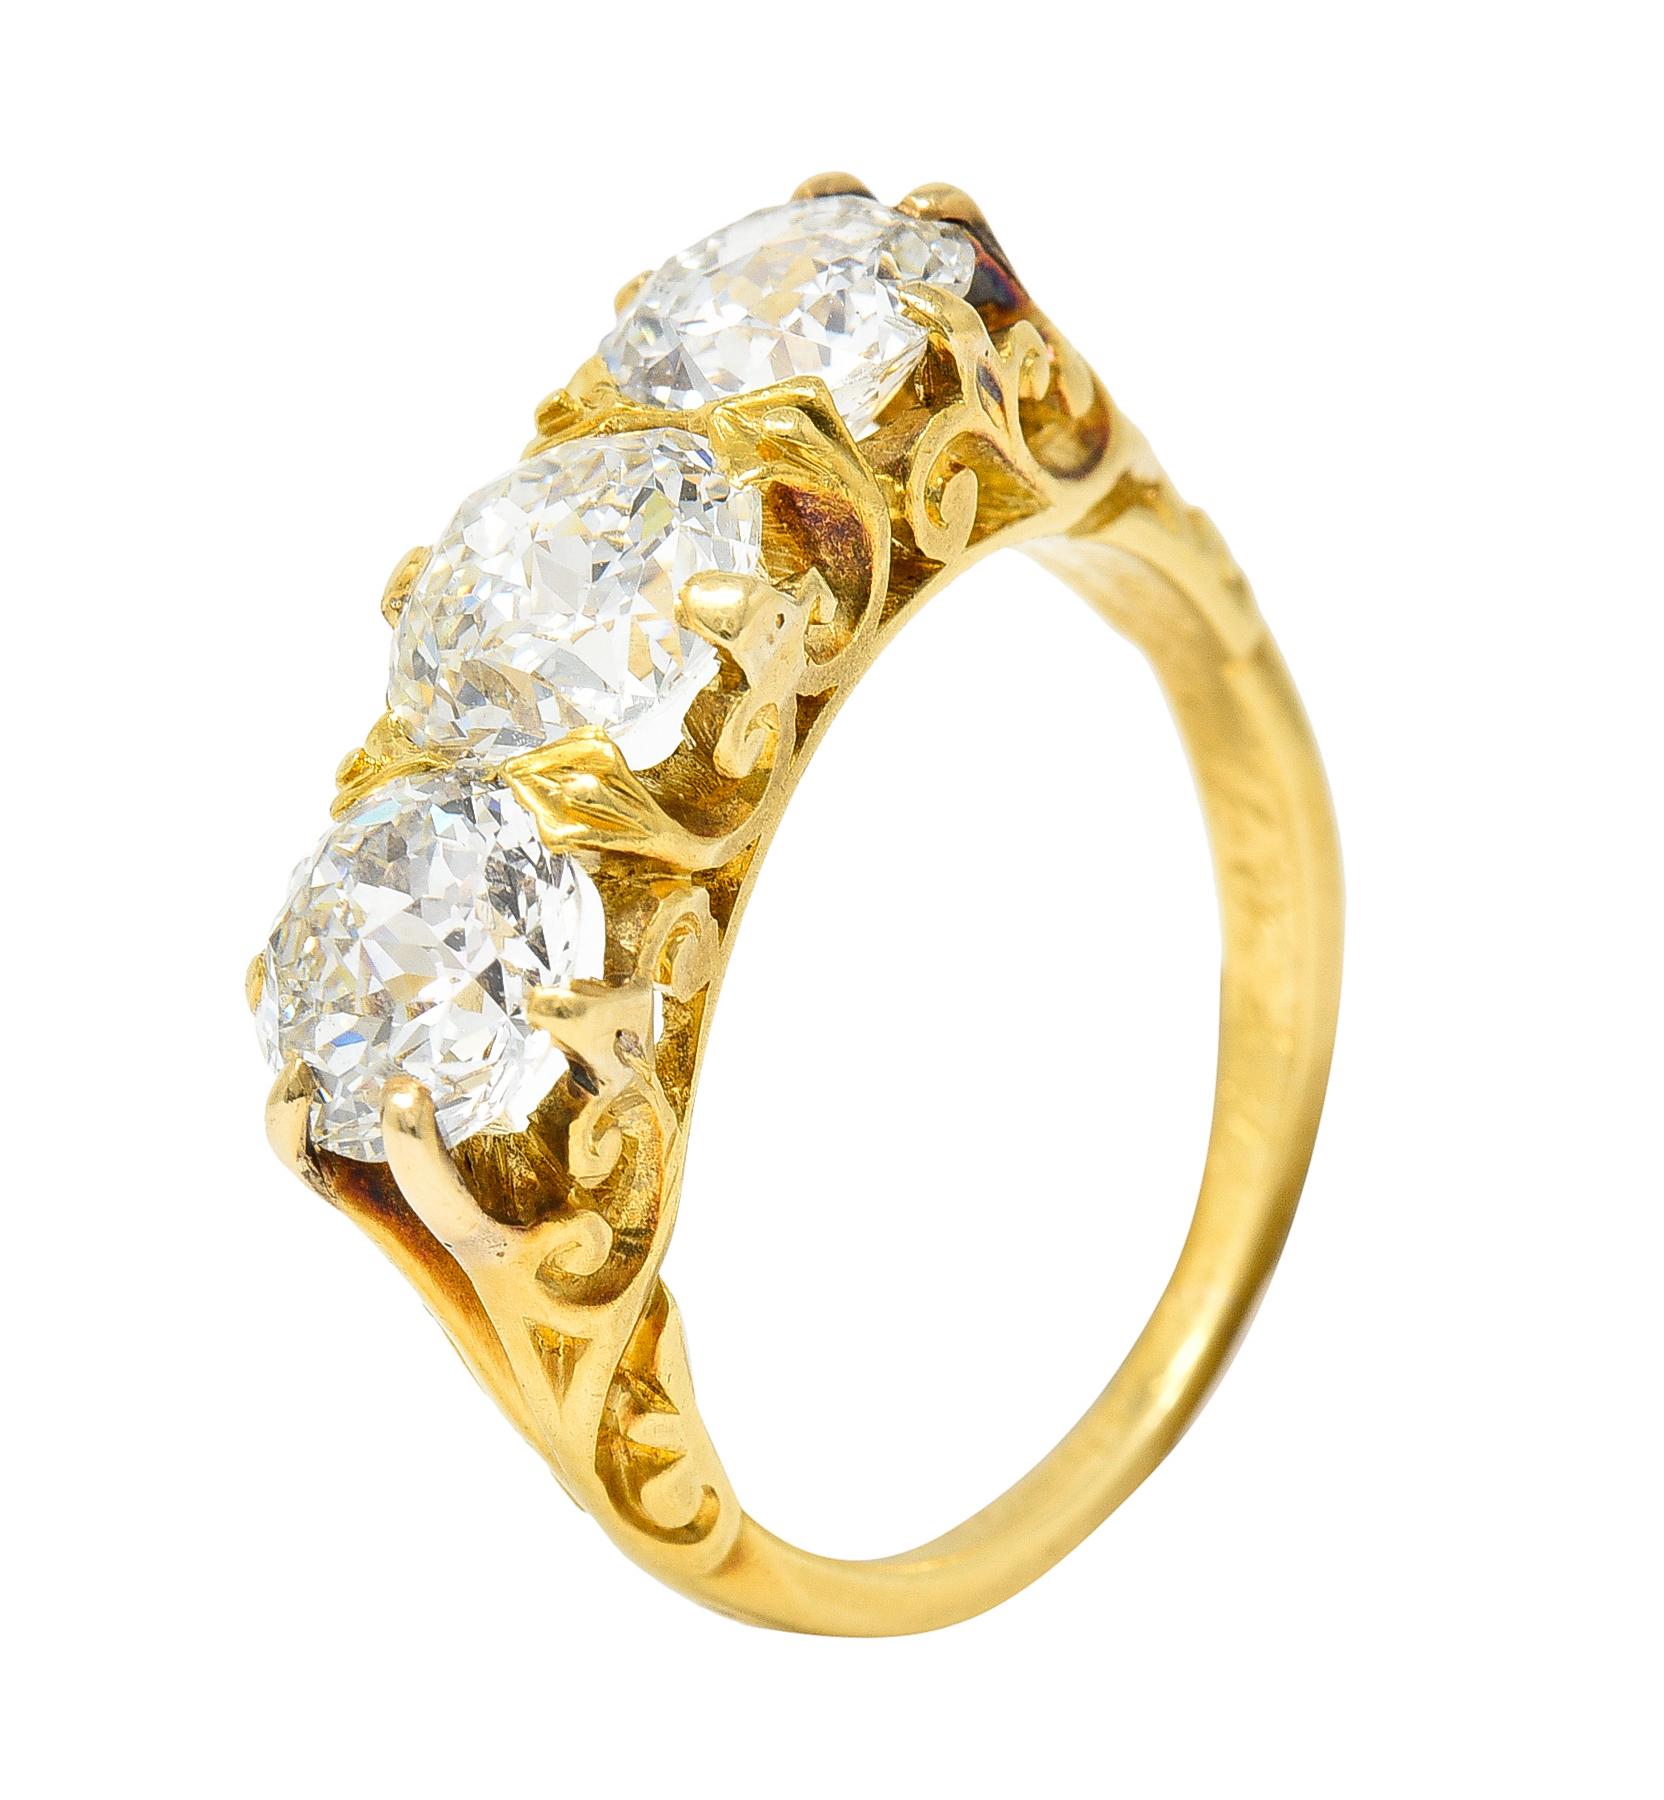 T.B. Starr Victorian 2.64 Carat Jubilee Cut Diamond 18K Yellow Gold Antique Ring For Sale 5